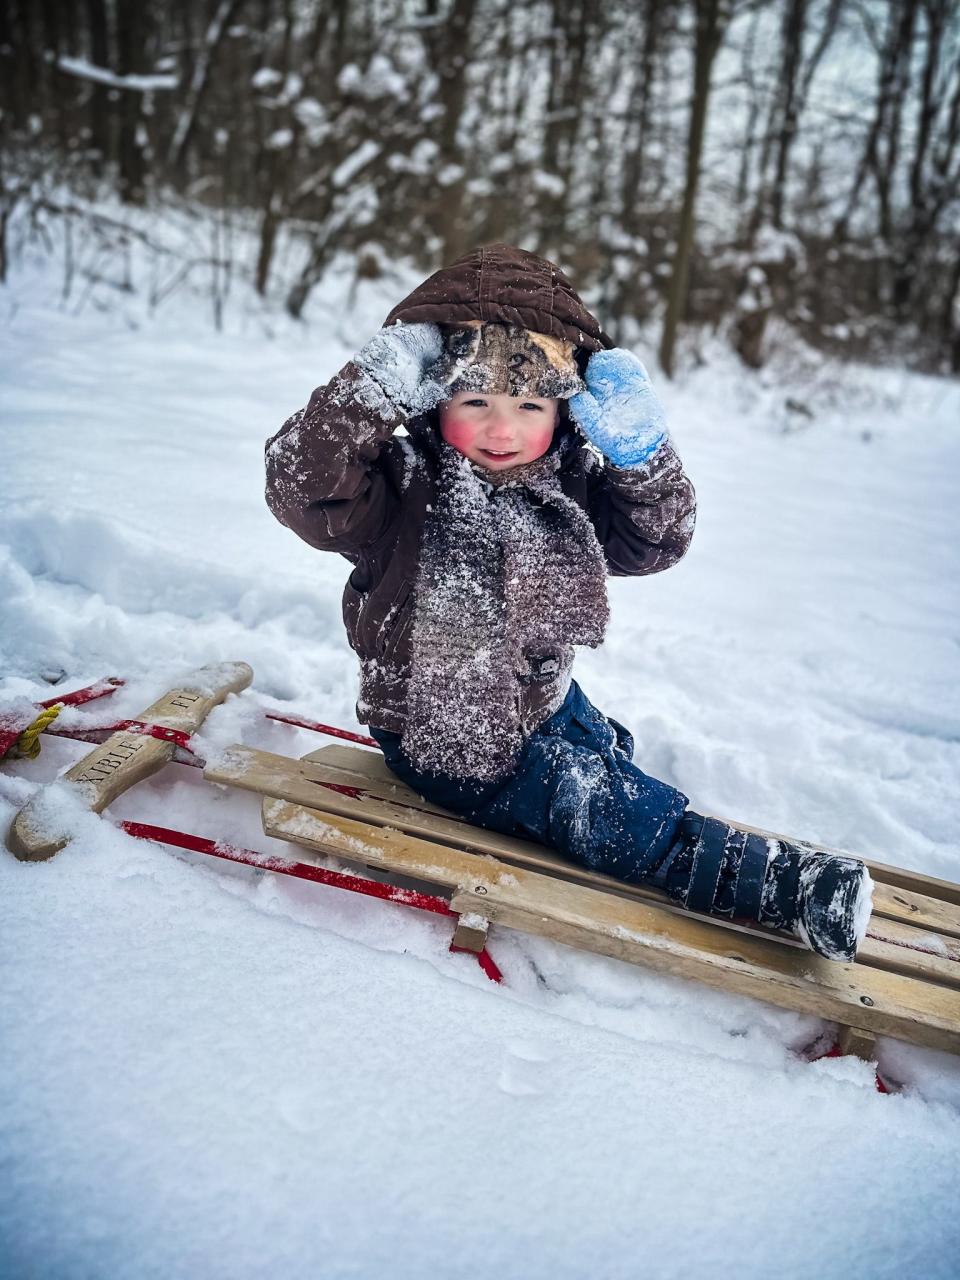 Hunter Ellwood, 2, son of Joey and Amy Ellwood, plays in the snow in Mill Township.